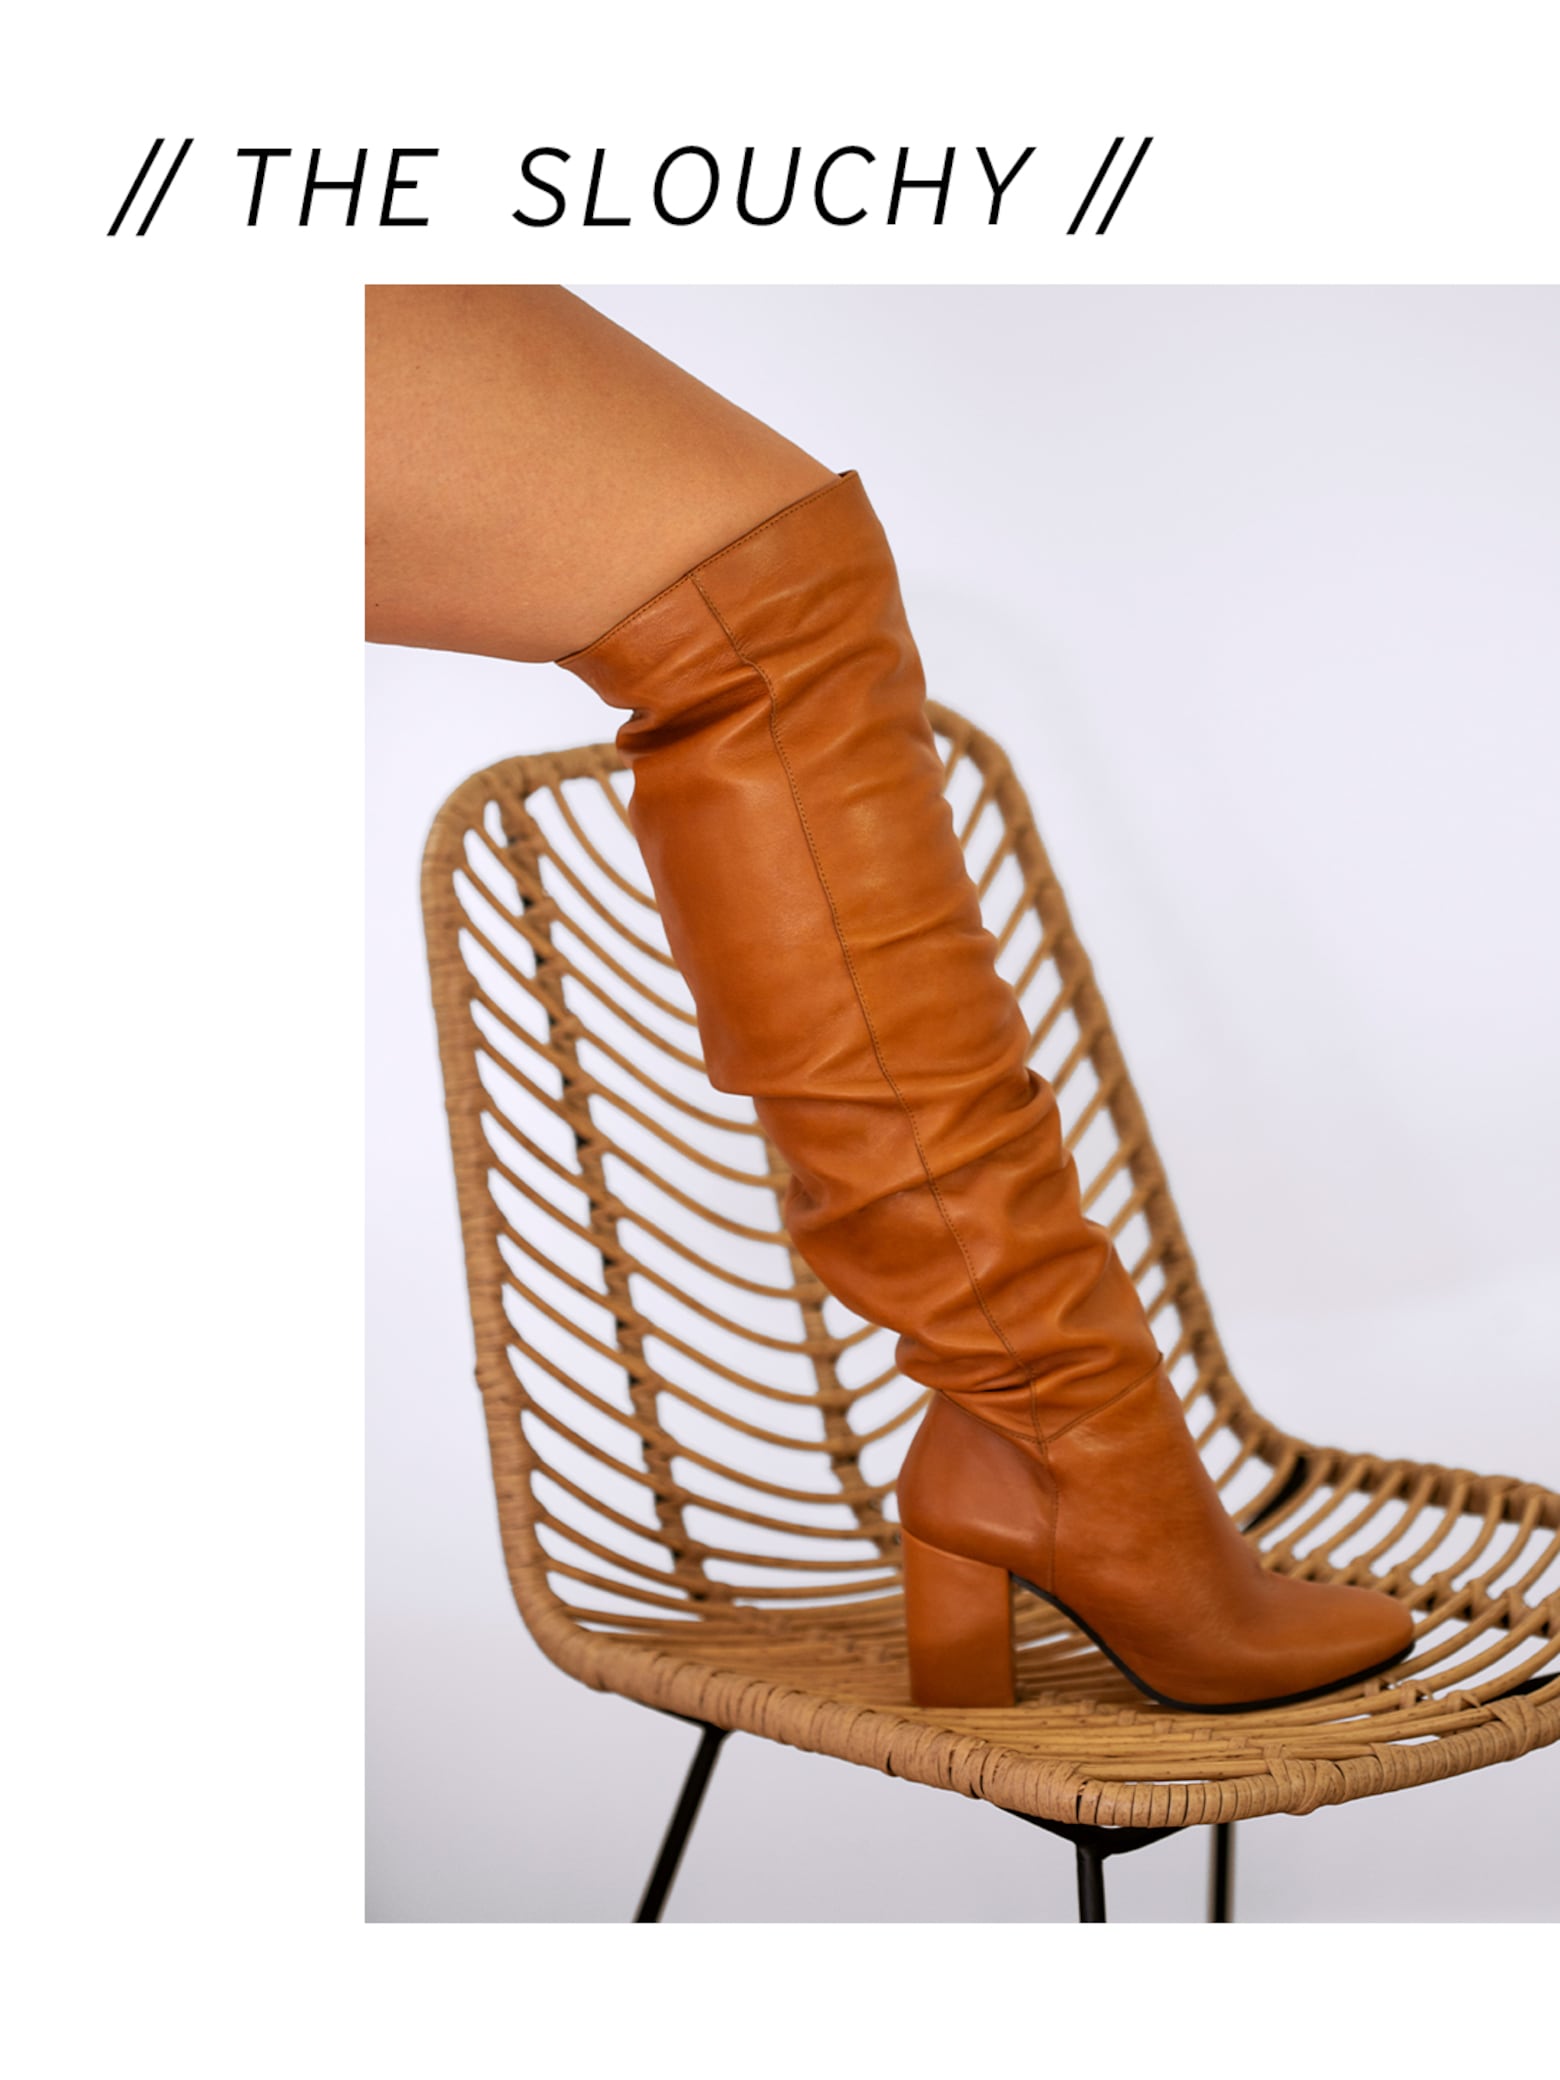 Chunky, slouchy & Co. New Boot Trends